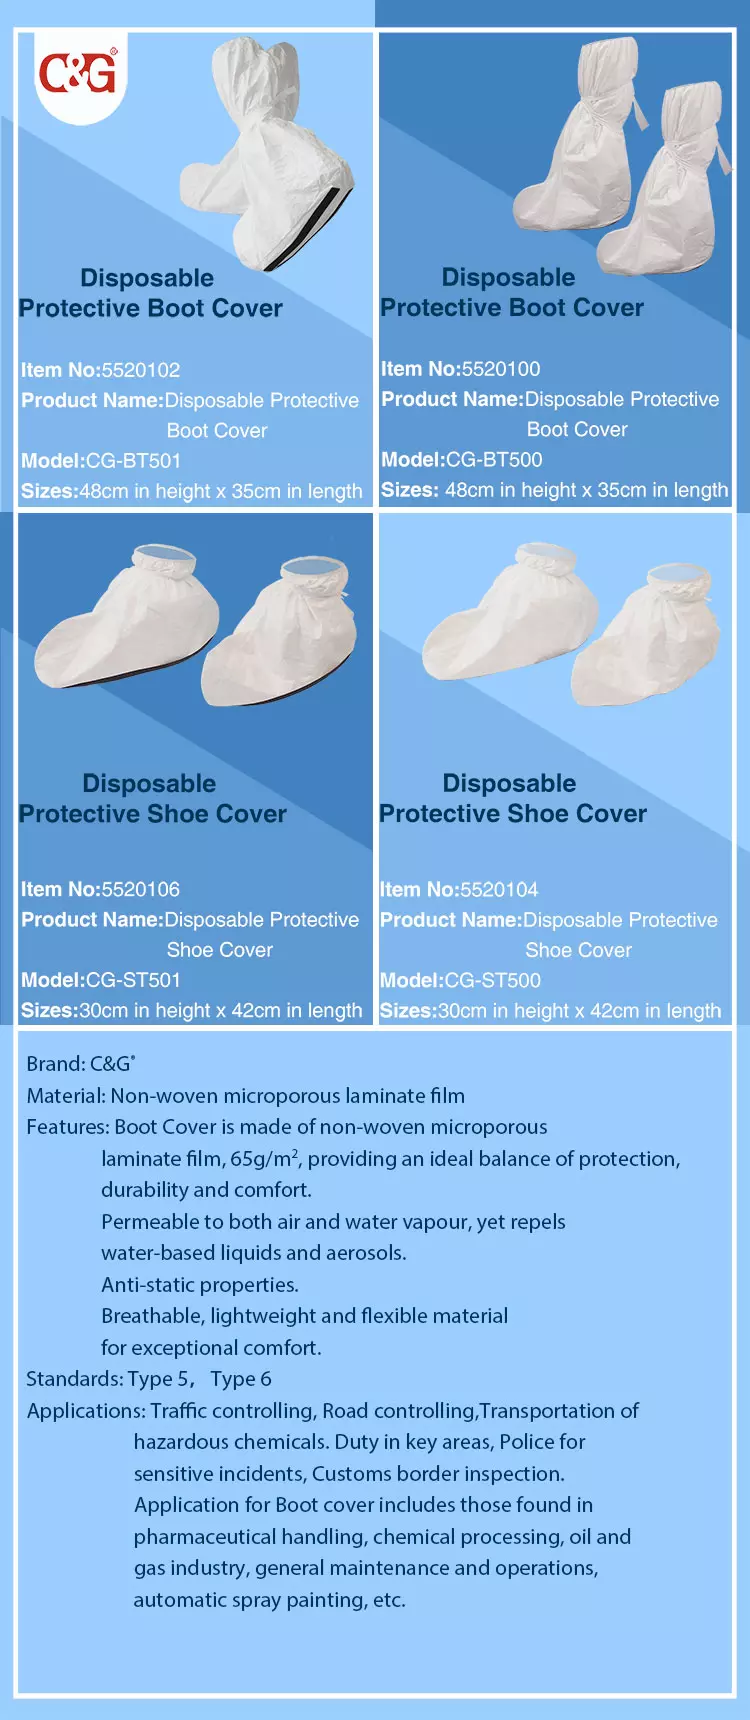 Disposable Bootsshoes cover with slip-resistant sole made with Non-woven Microporous laminate Film